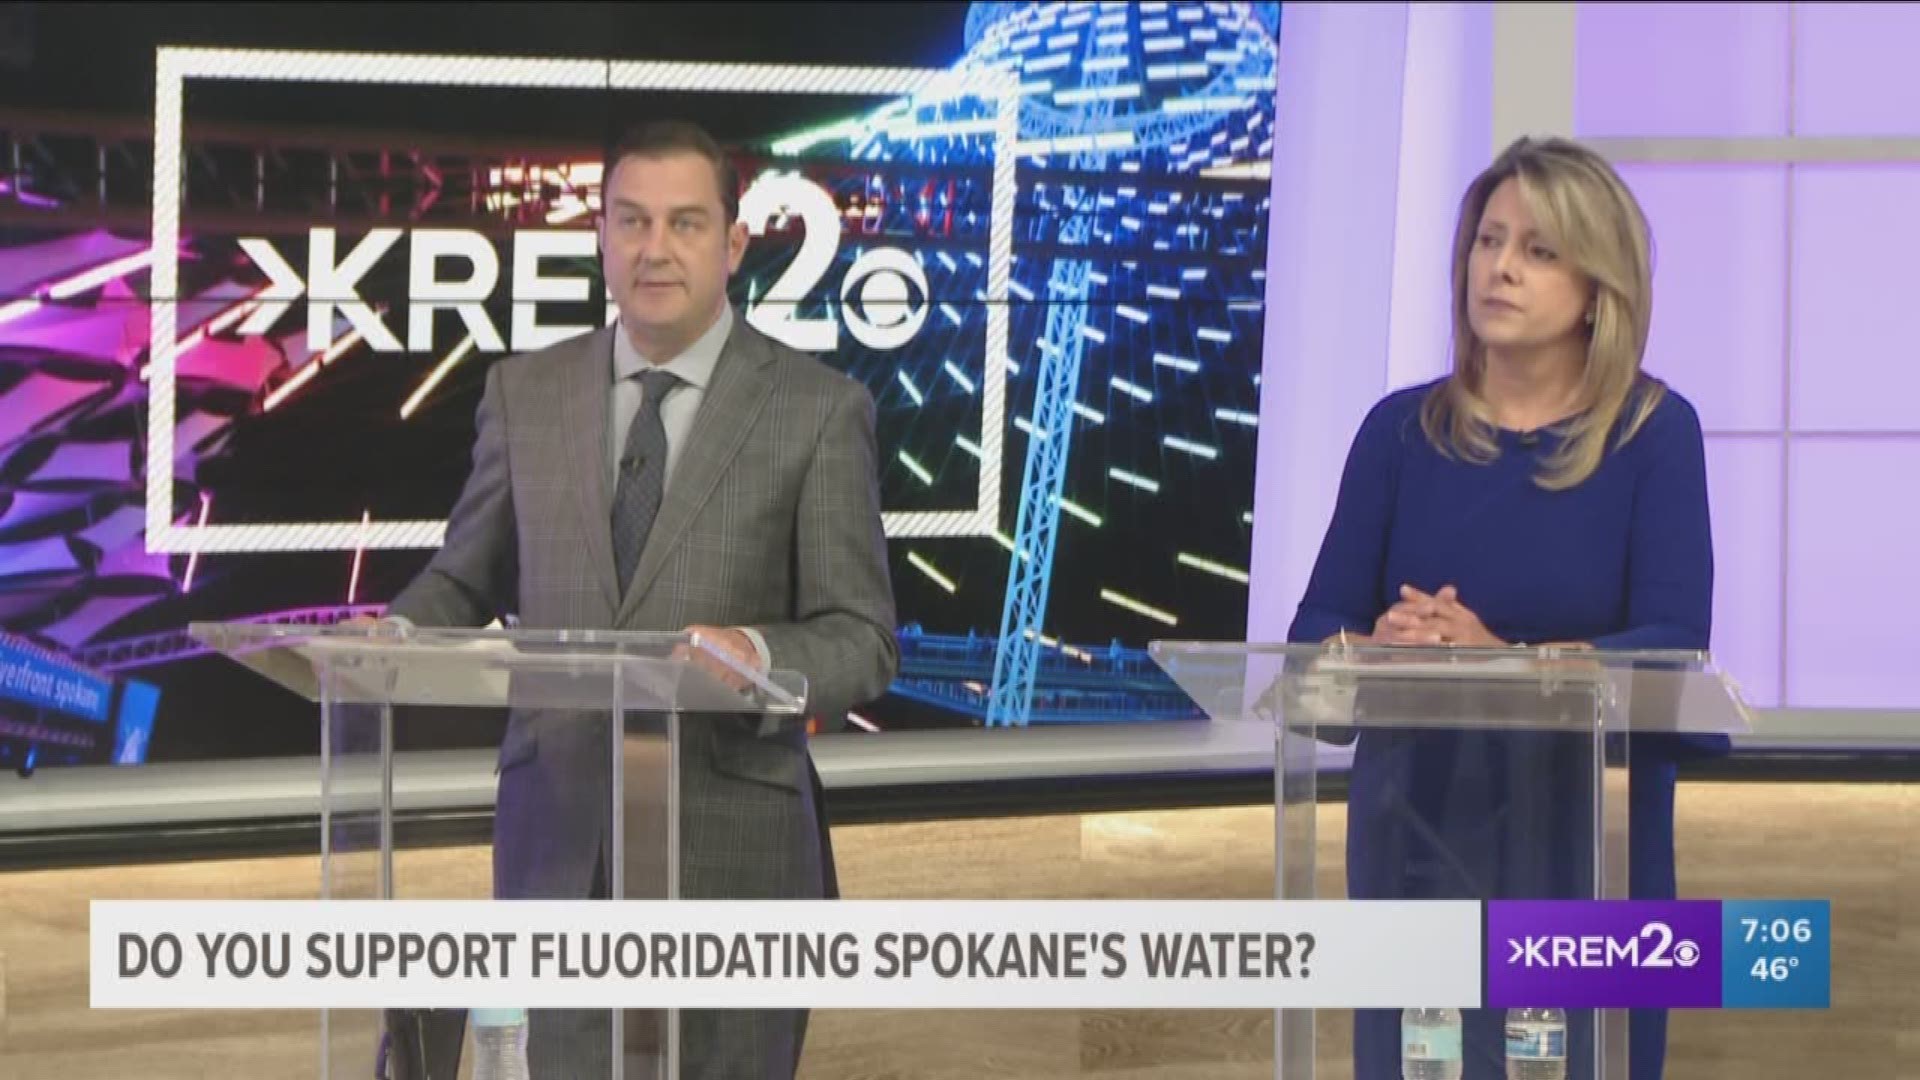 Both candidates were asked if they support adding fluoride to Spokane's water.